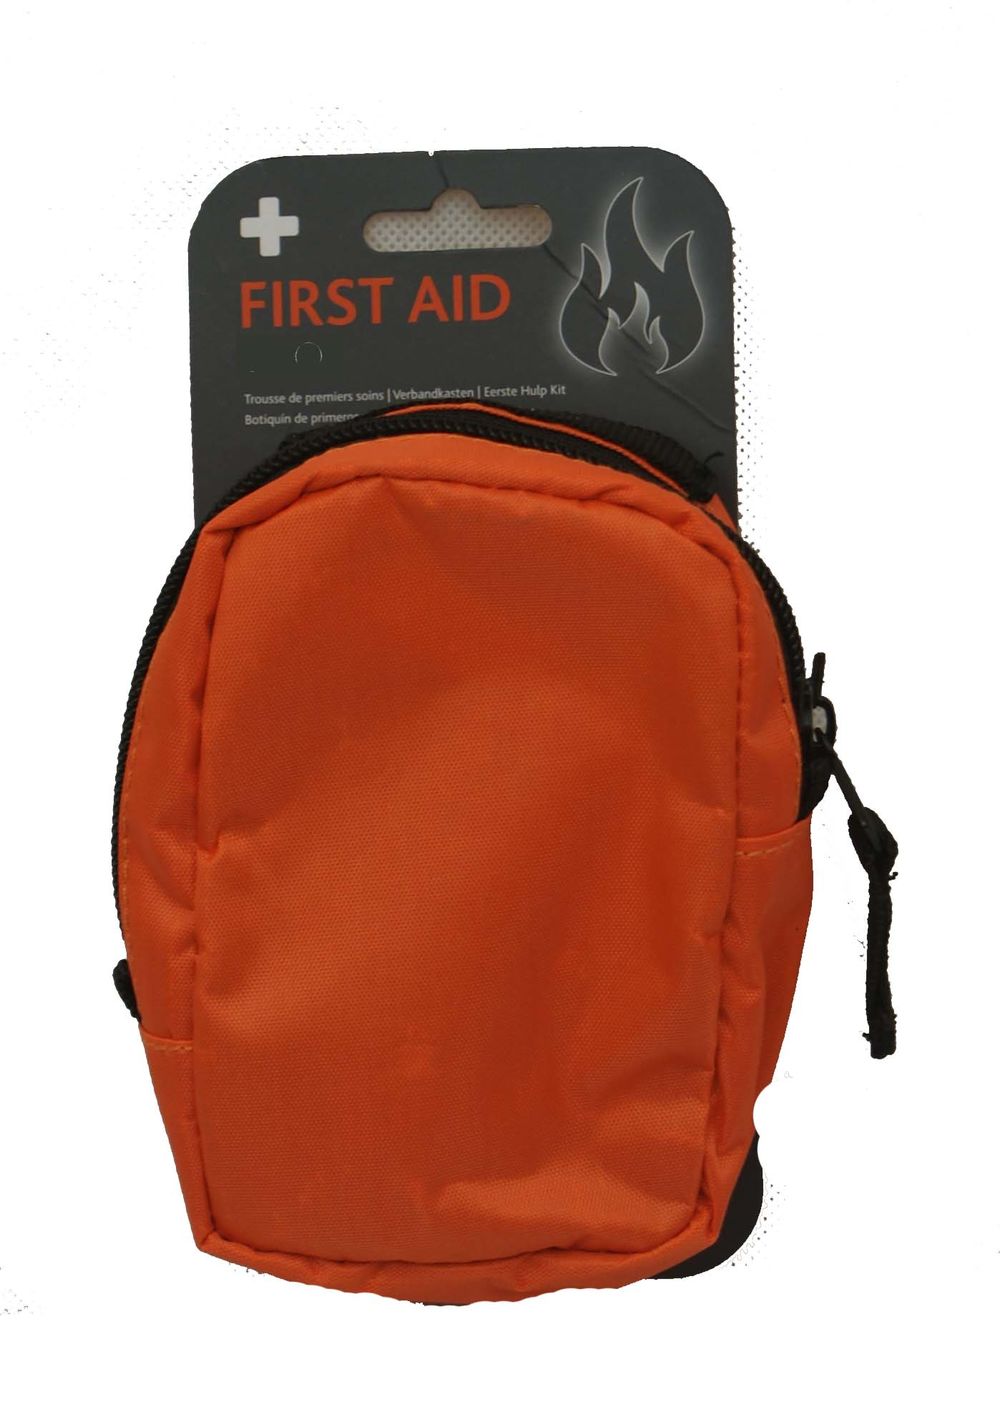 Outdoor First Aid belt pouch pack